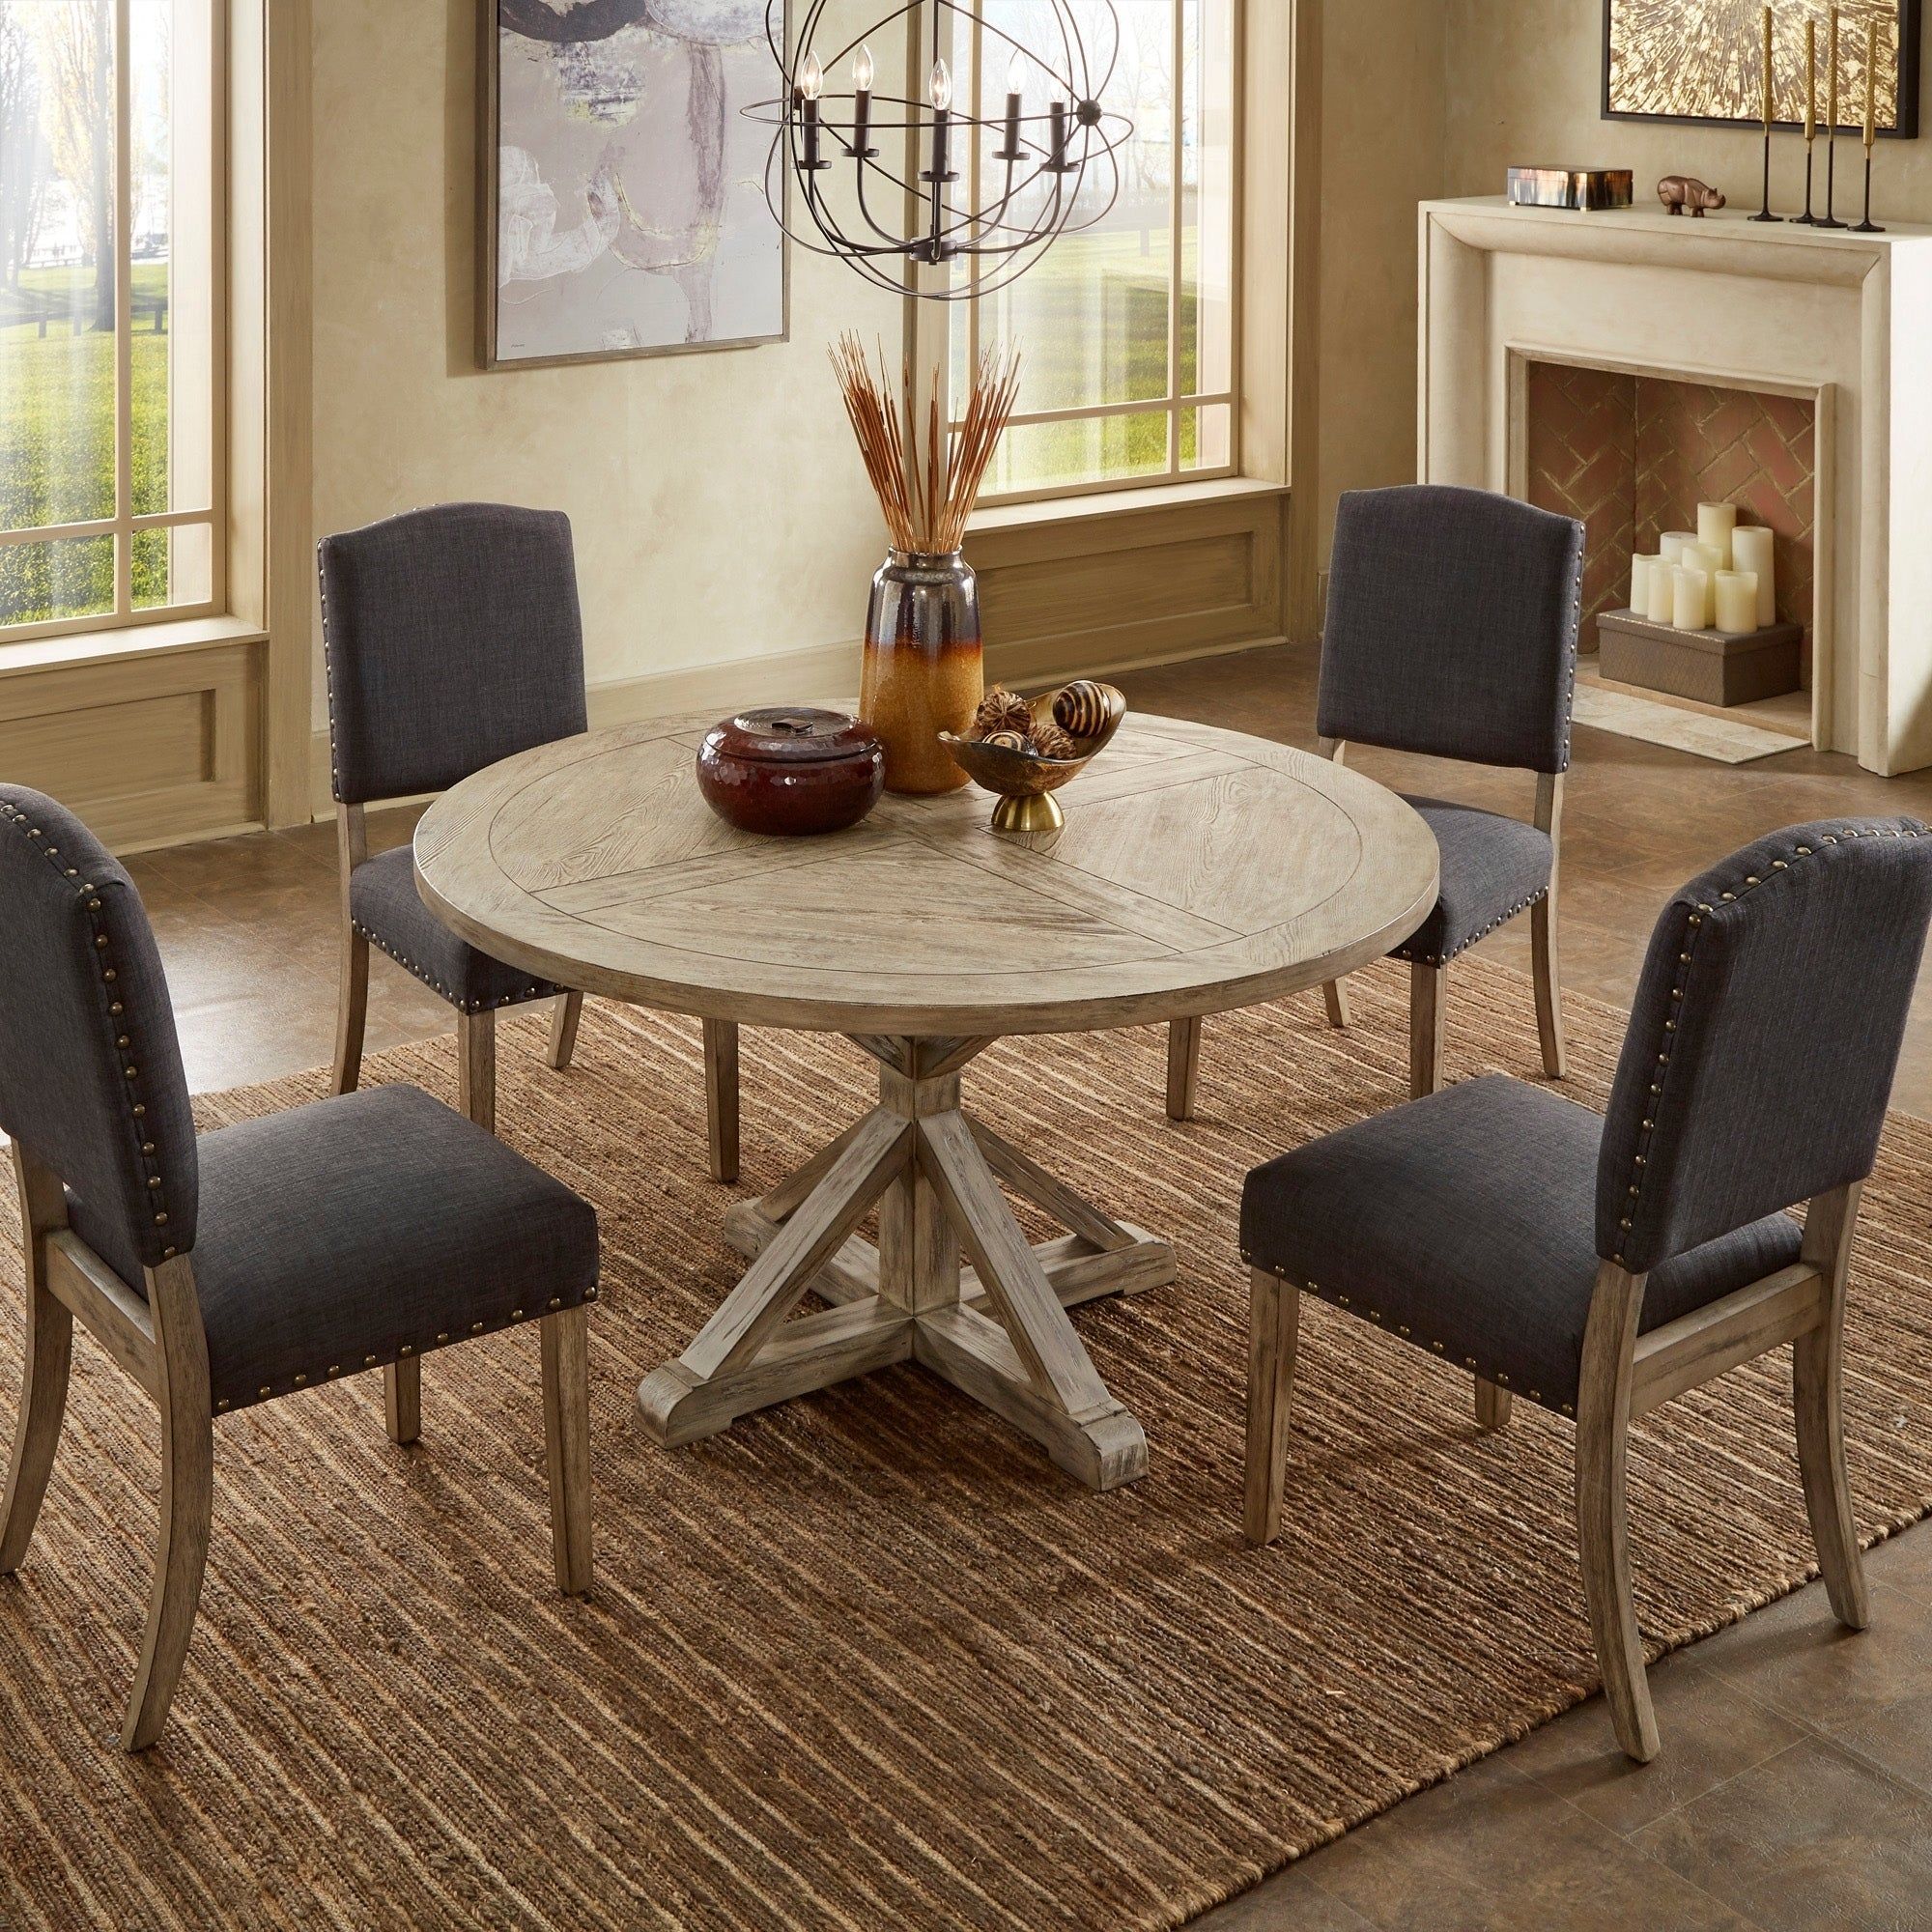 Benchwright Antique Grey Oak Round Dining Setinspire Q Artisan Pertaining To Most Recently Released Blackened Oak Benchwright Dining Tables (View 25 of 25)